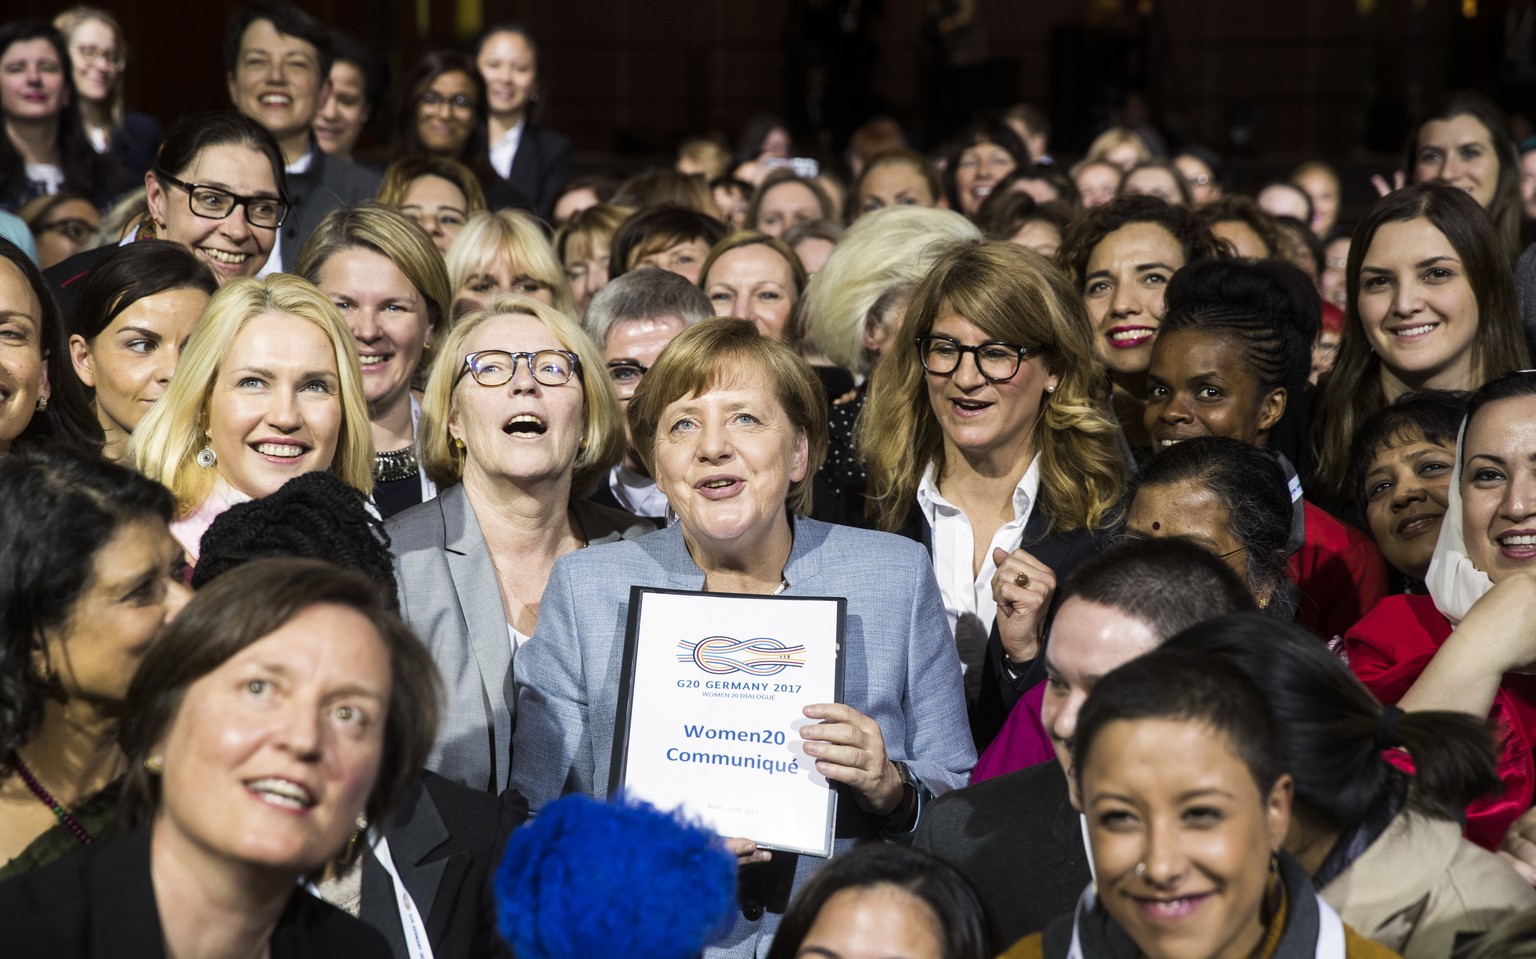 German Chancellor Angela Merkel, center, holds the communique as she poses with delegates for a group photo at the end of the W20 summit 2017 in Berlin, Germany, Wednesday, April 26, 2017. (Odd Anders ...